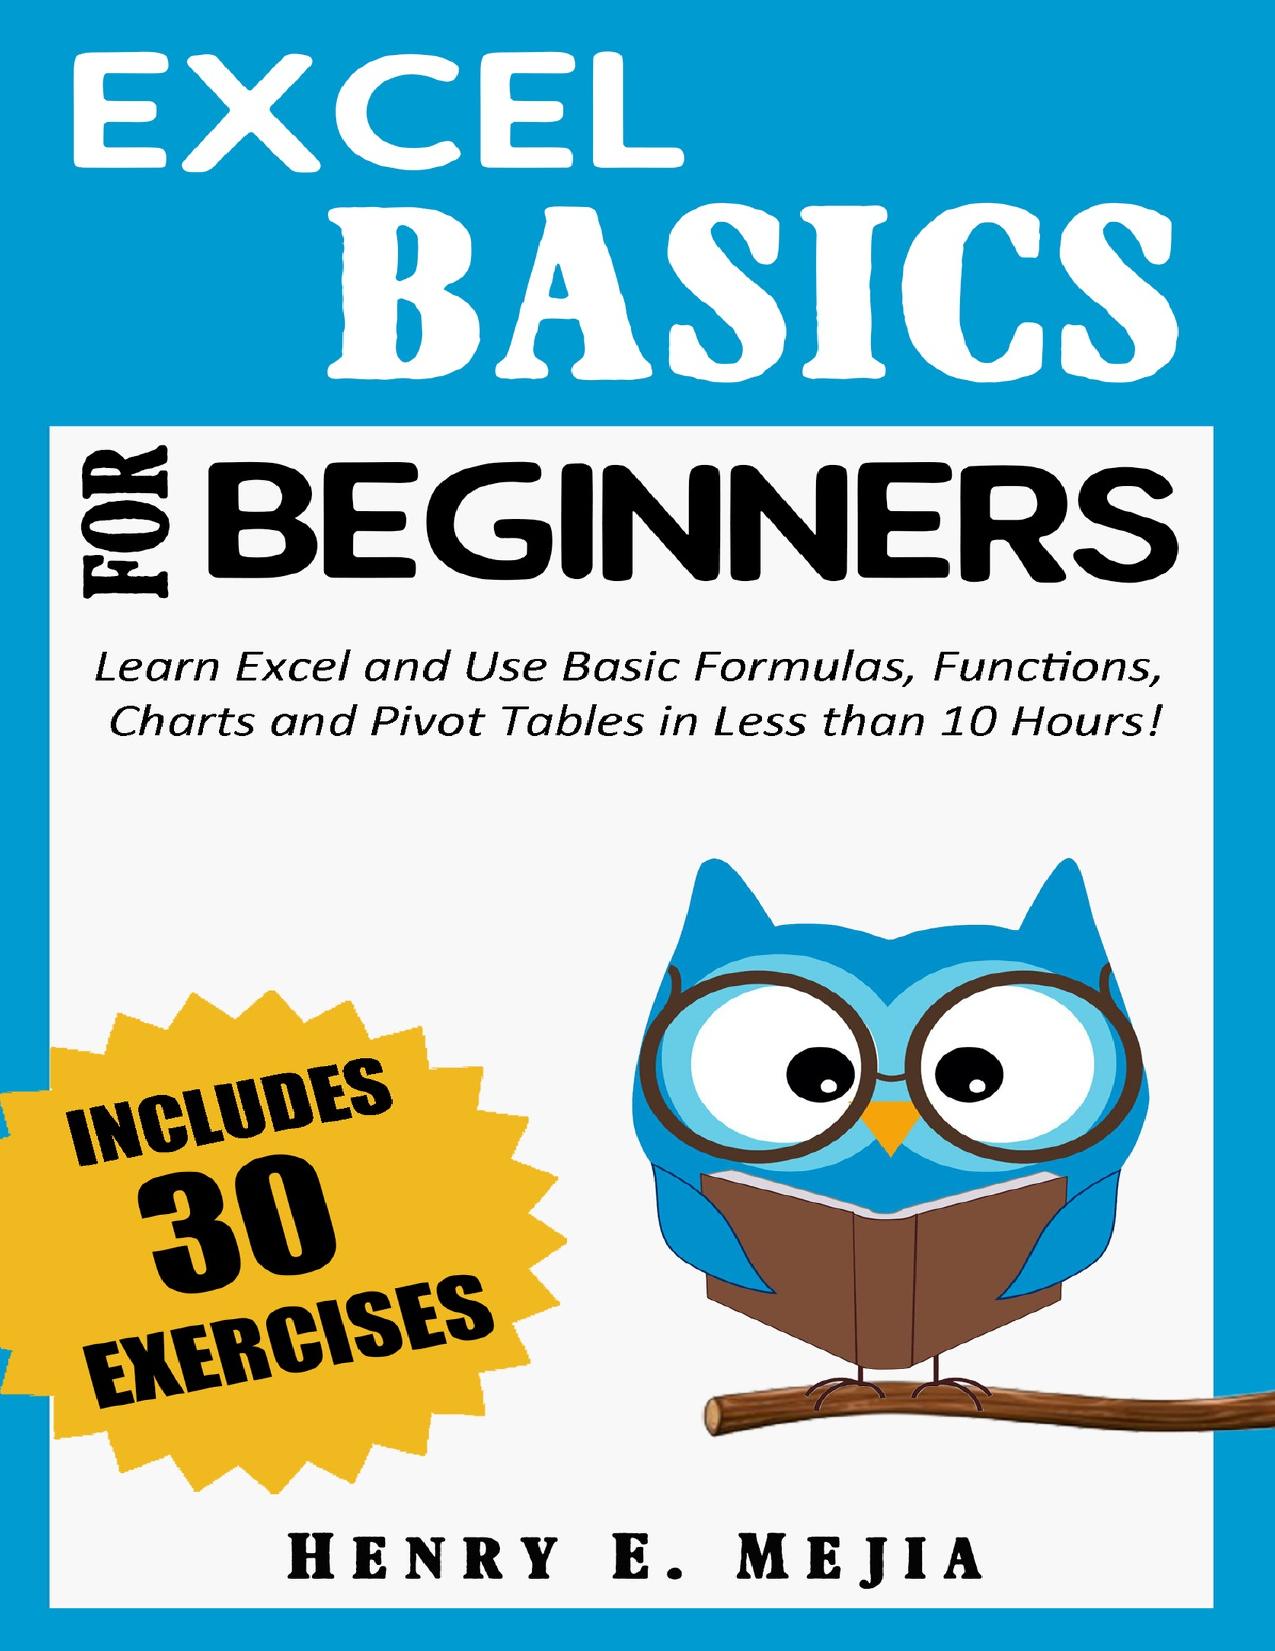 EXCEL BASICS FOR BEGINNERS: Learn Excel and Use Basic Formulas, Functions, Charts and Pivot Tables in Less Than 10 Hours! by Mejia Henry E